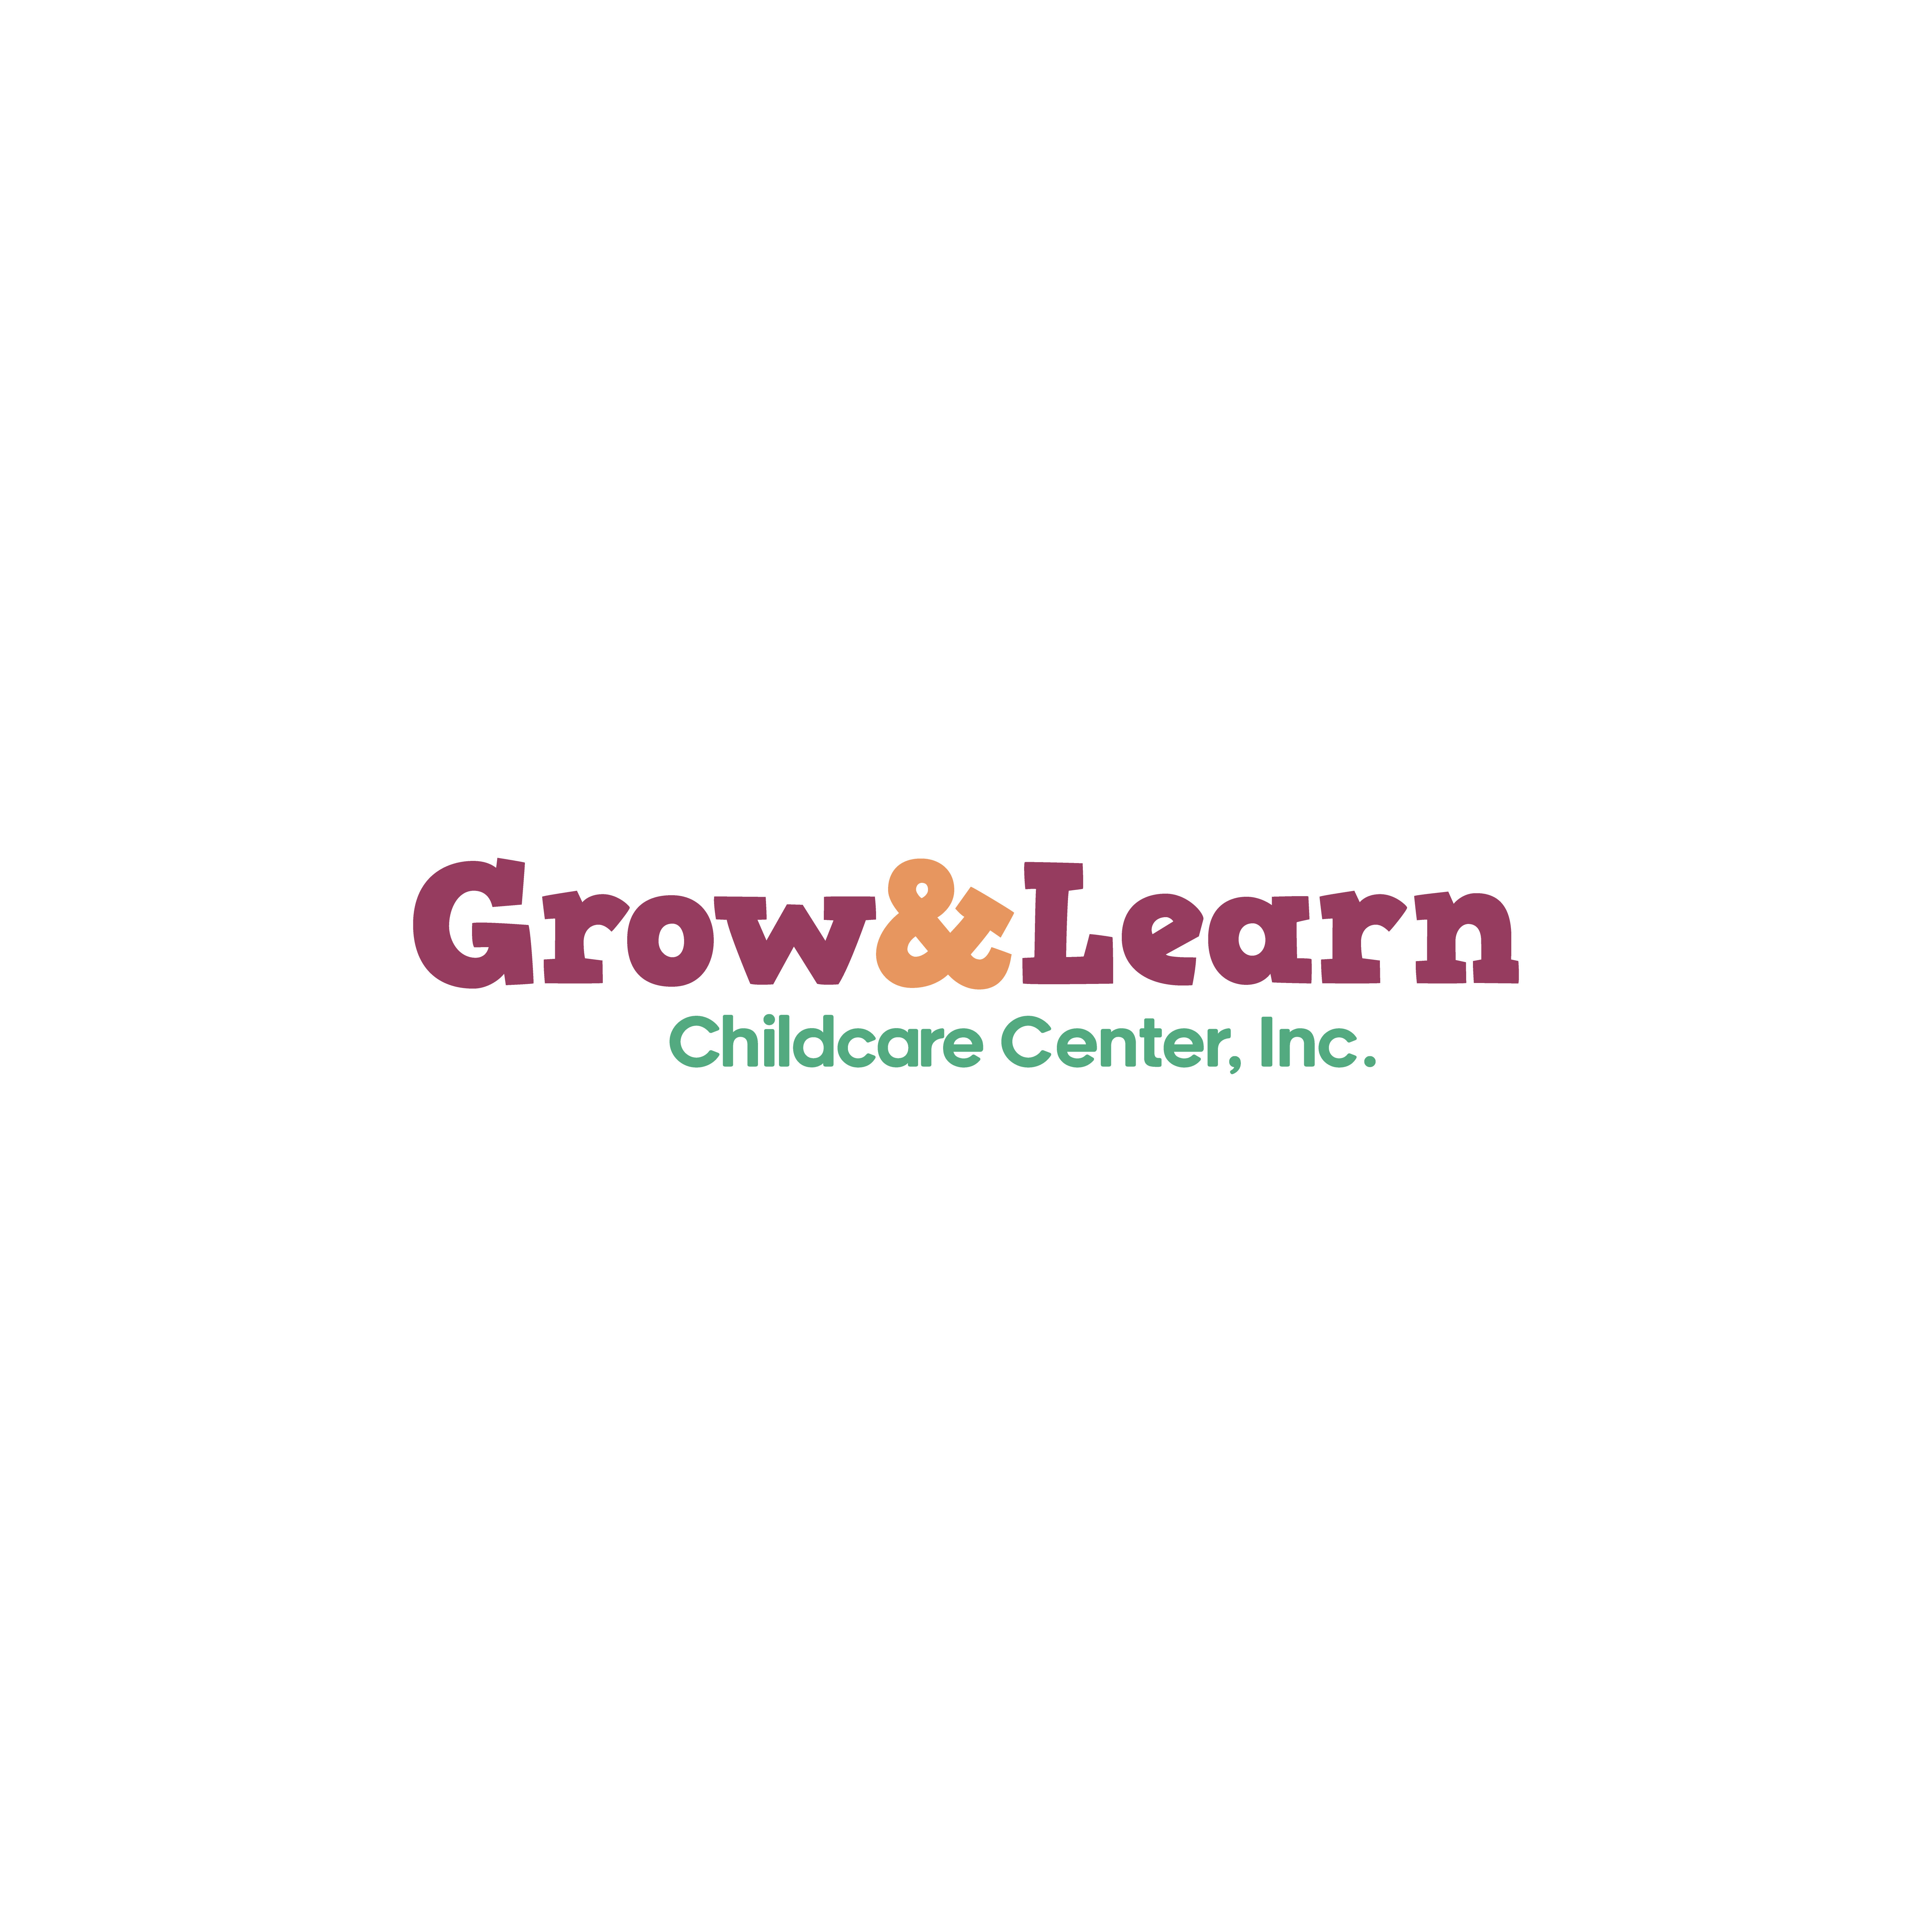 Grow & Learn Childcare Center